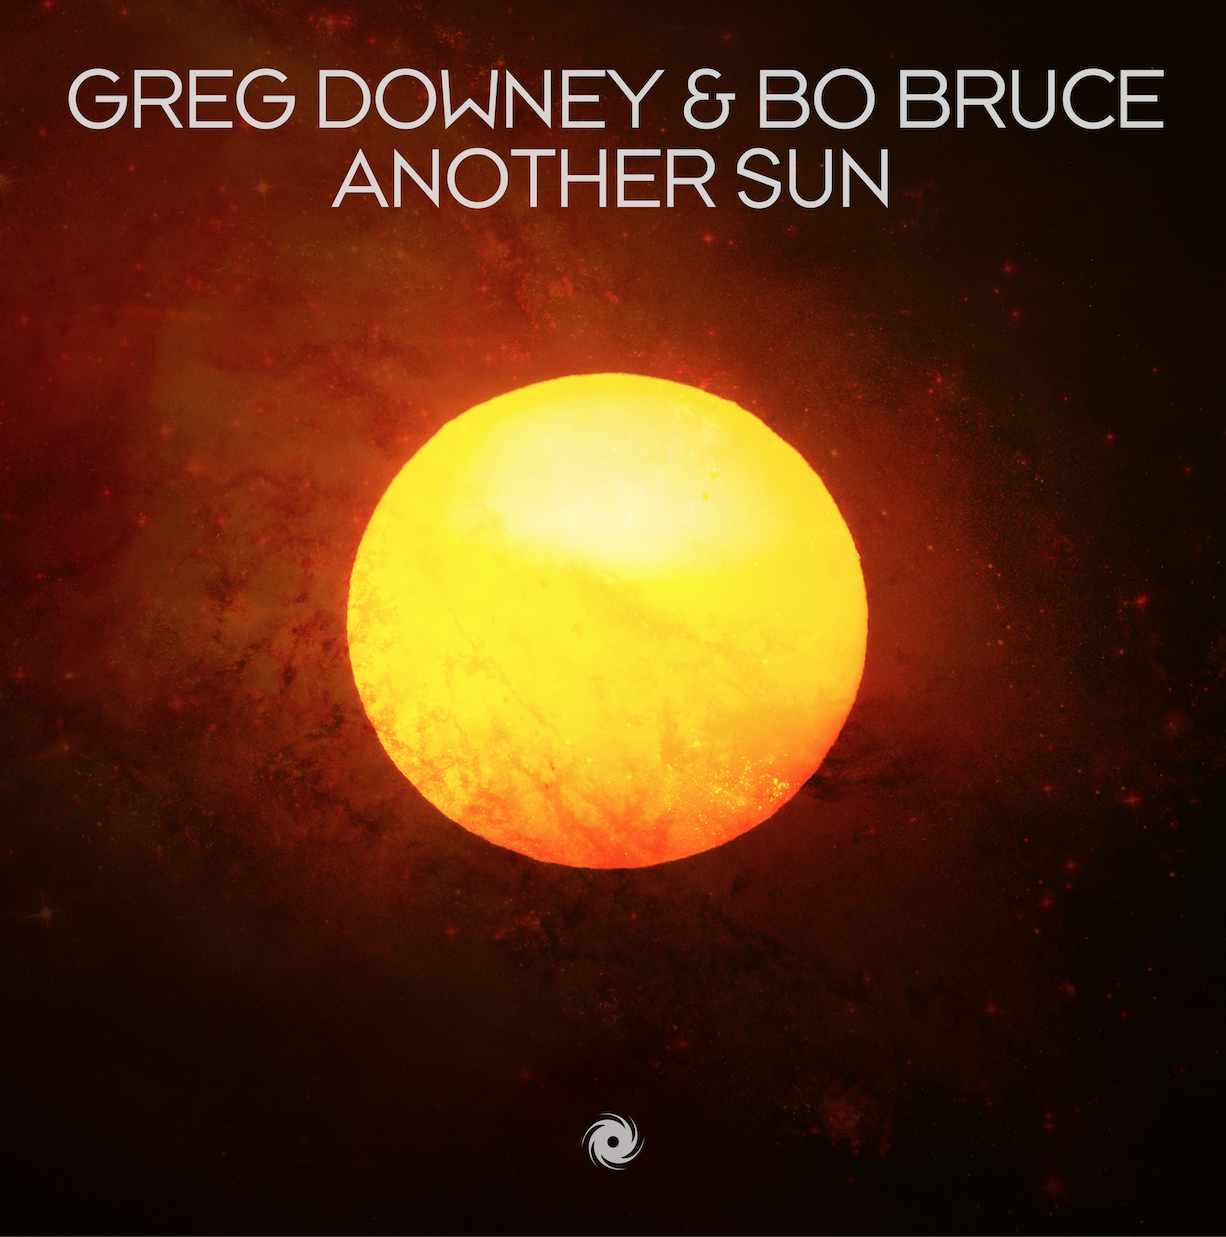 Greg Downey and Bo Bruce presents Another Sun on Black Hole Recordings